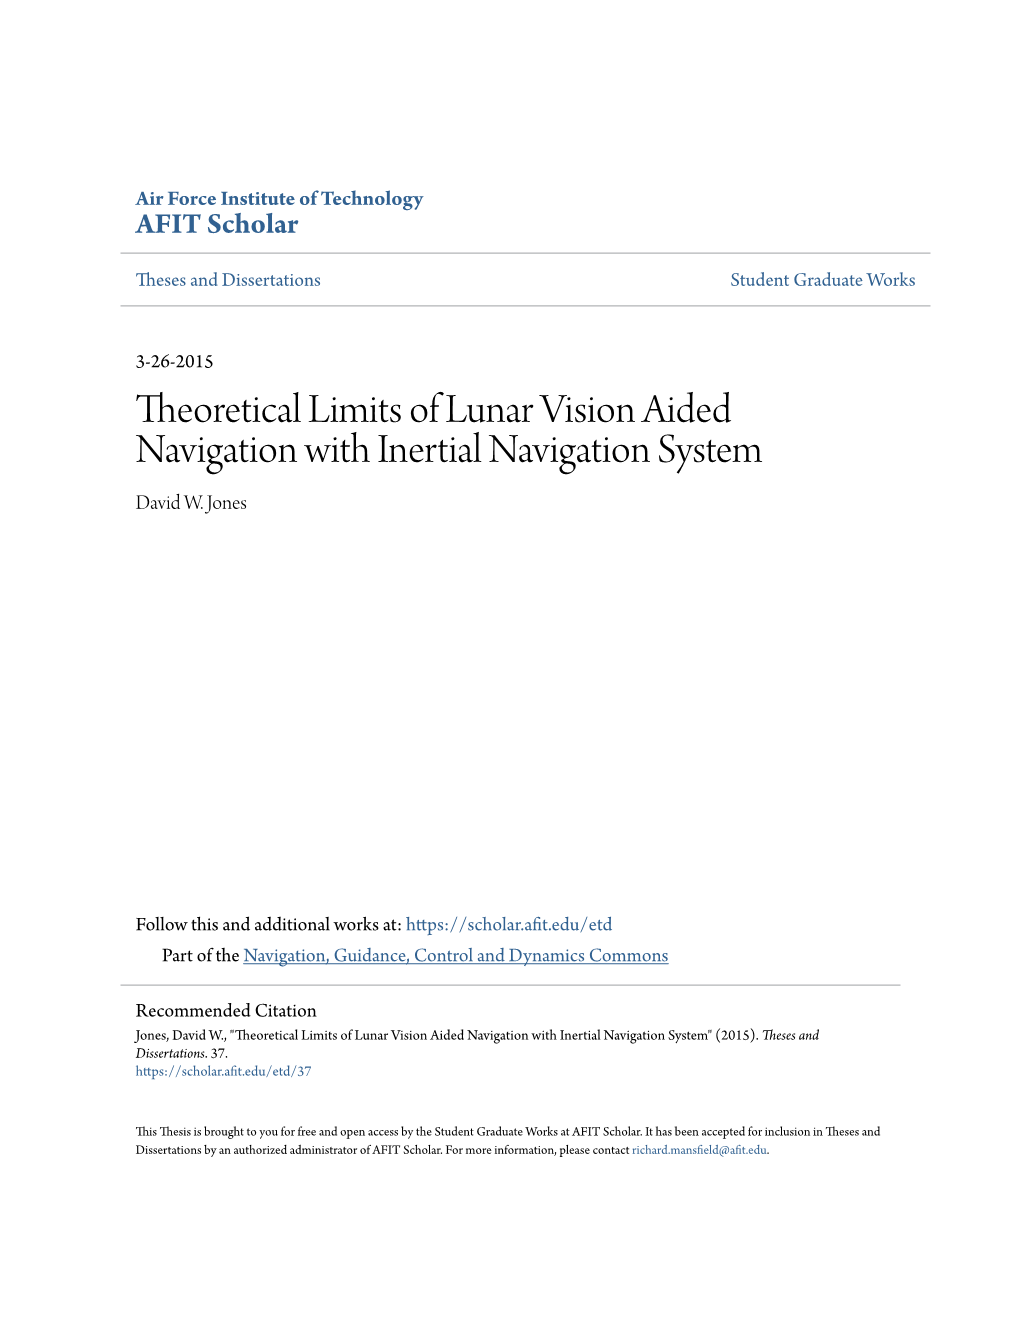 Theoretical Limits of Lunar Vision Aided Navigation with Inertial Navigation System David W